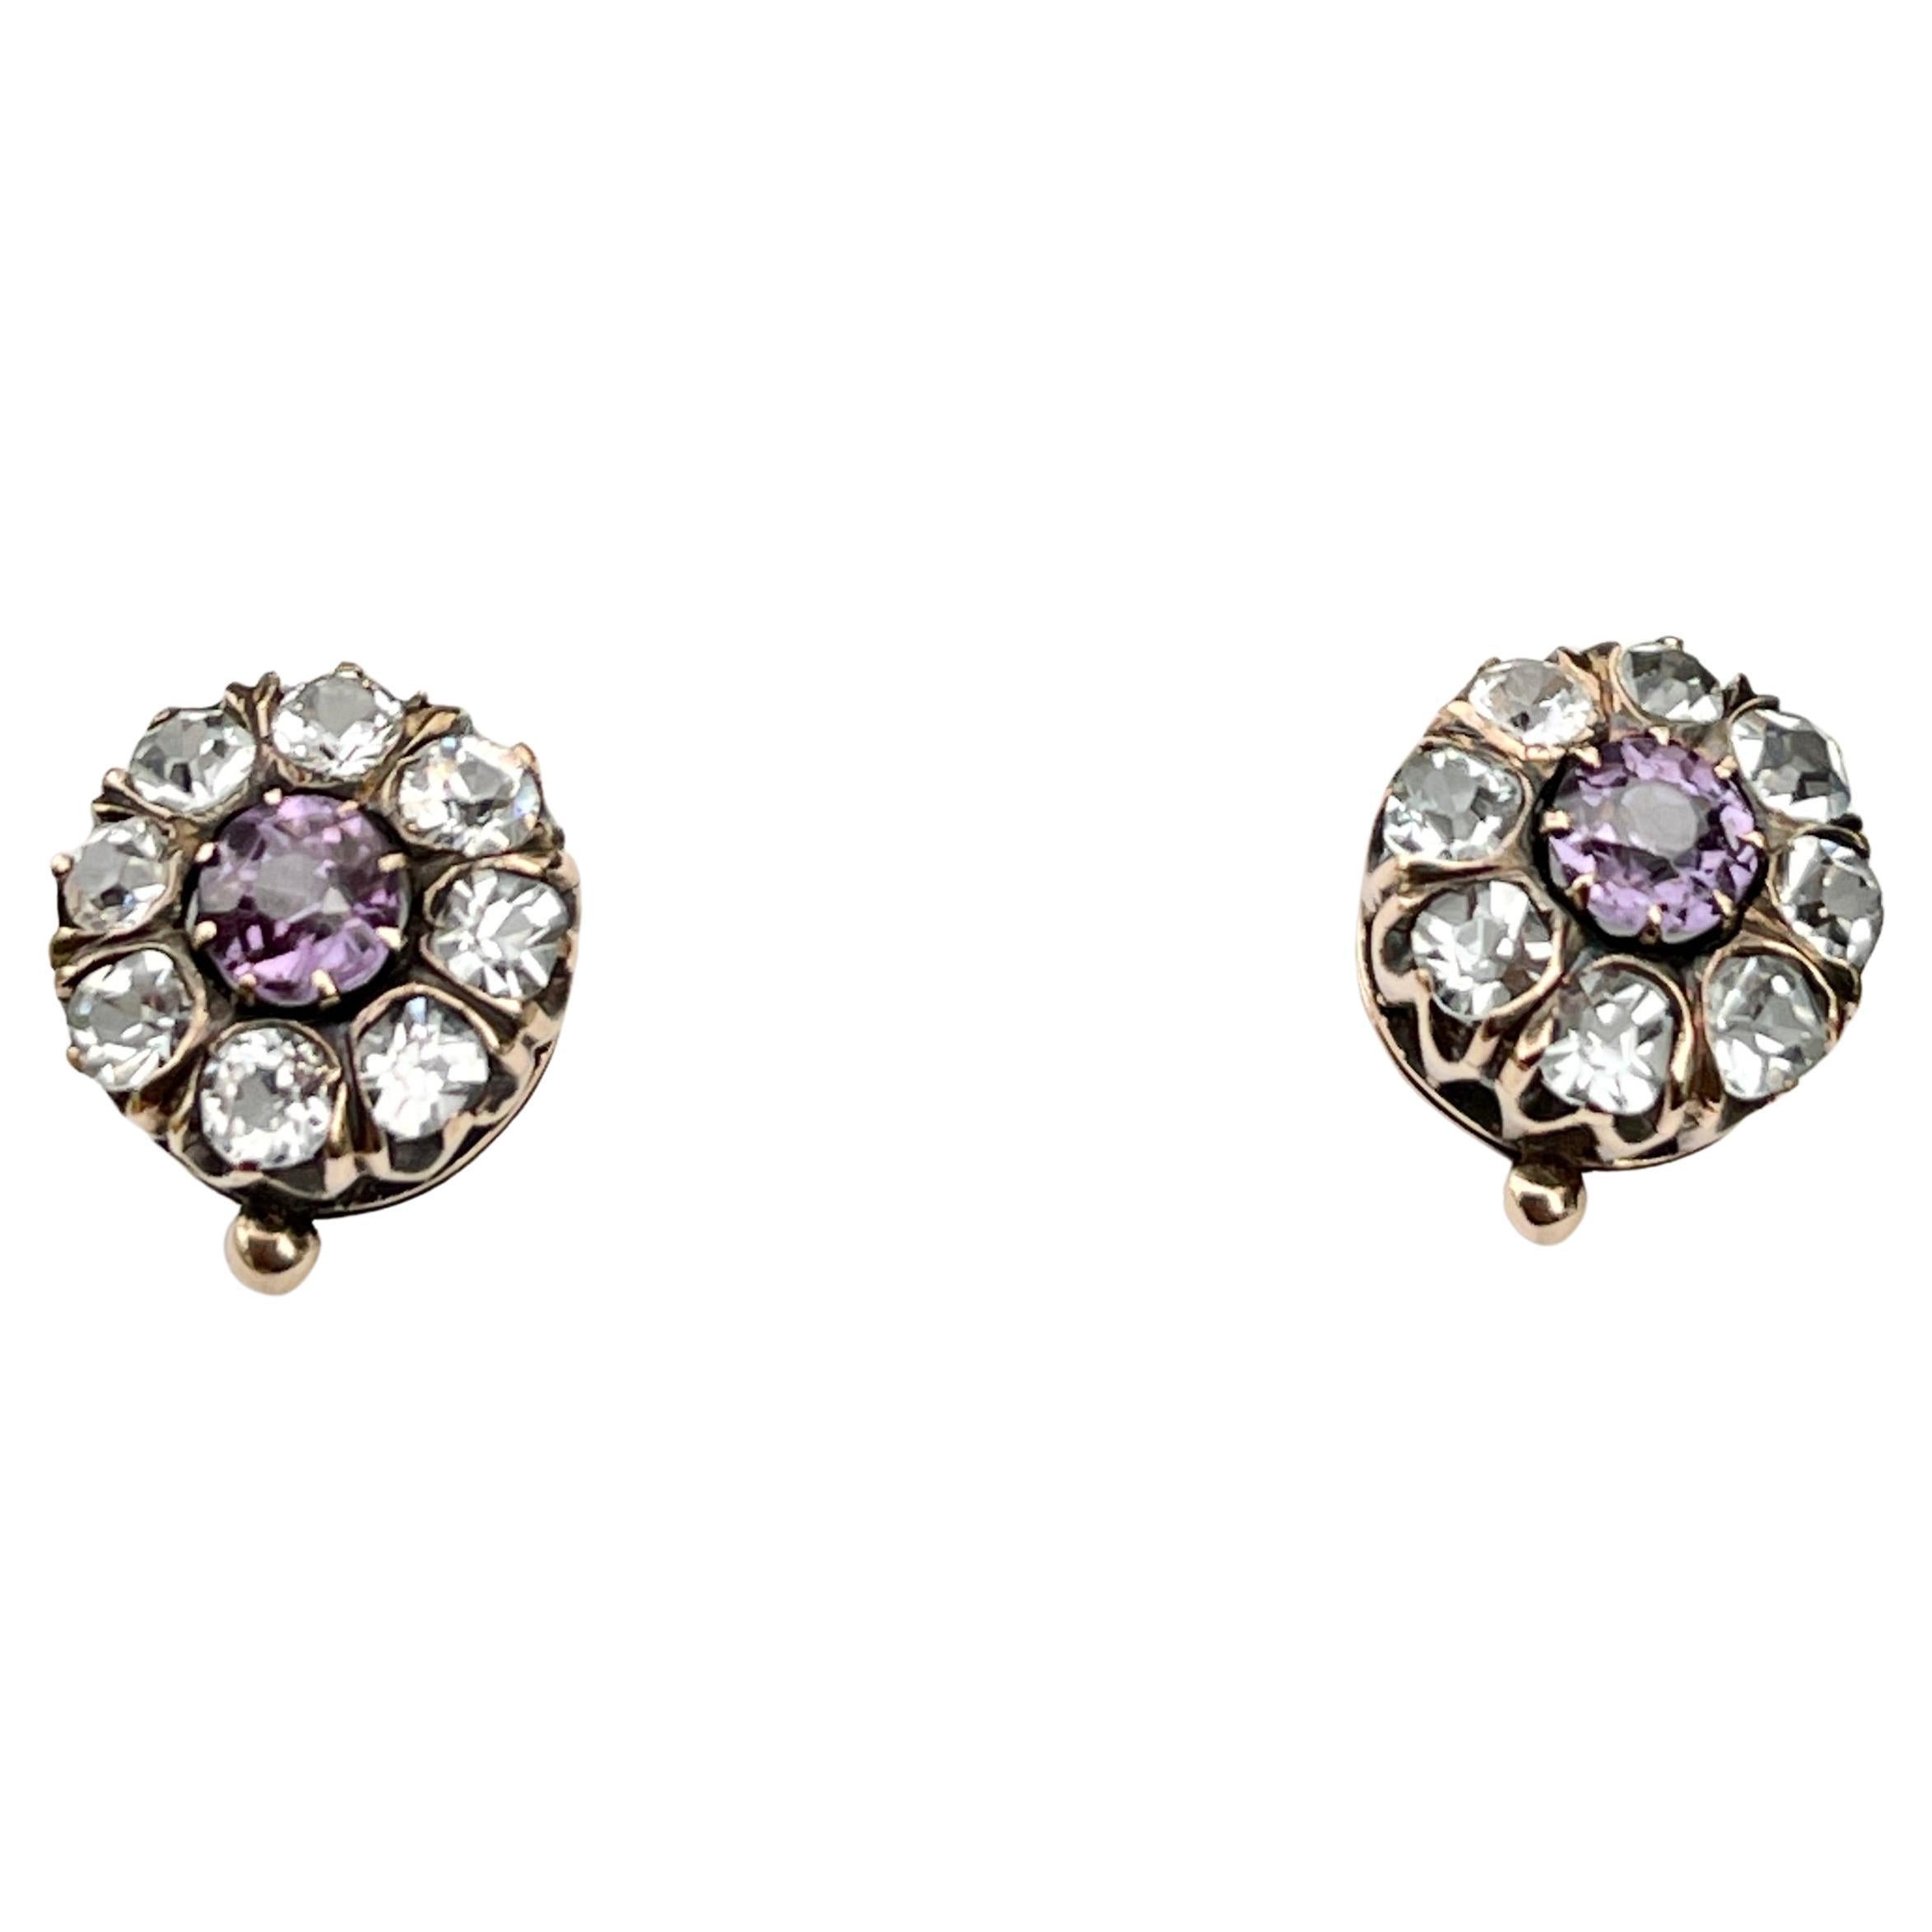 Very Unique Antique Earrings and a True Rarity

These Circa 1920s earrings are set with synthetic Corundum ‘imitating Alexandrite’ and colourless paste. The 1920s places them very early in the era of ‘colour-change’ creation (please continue reading